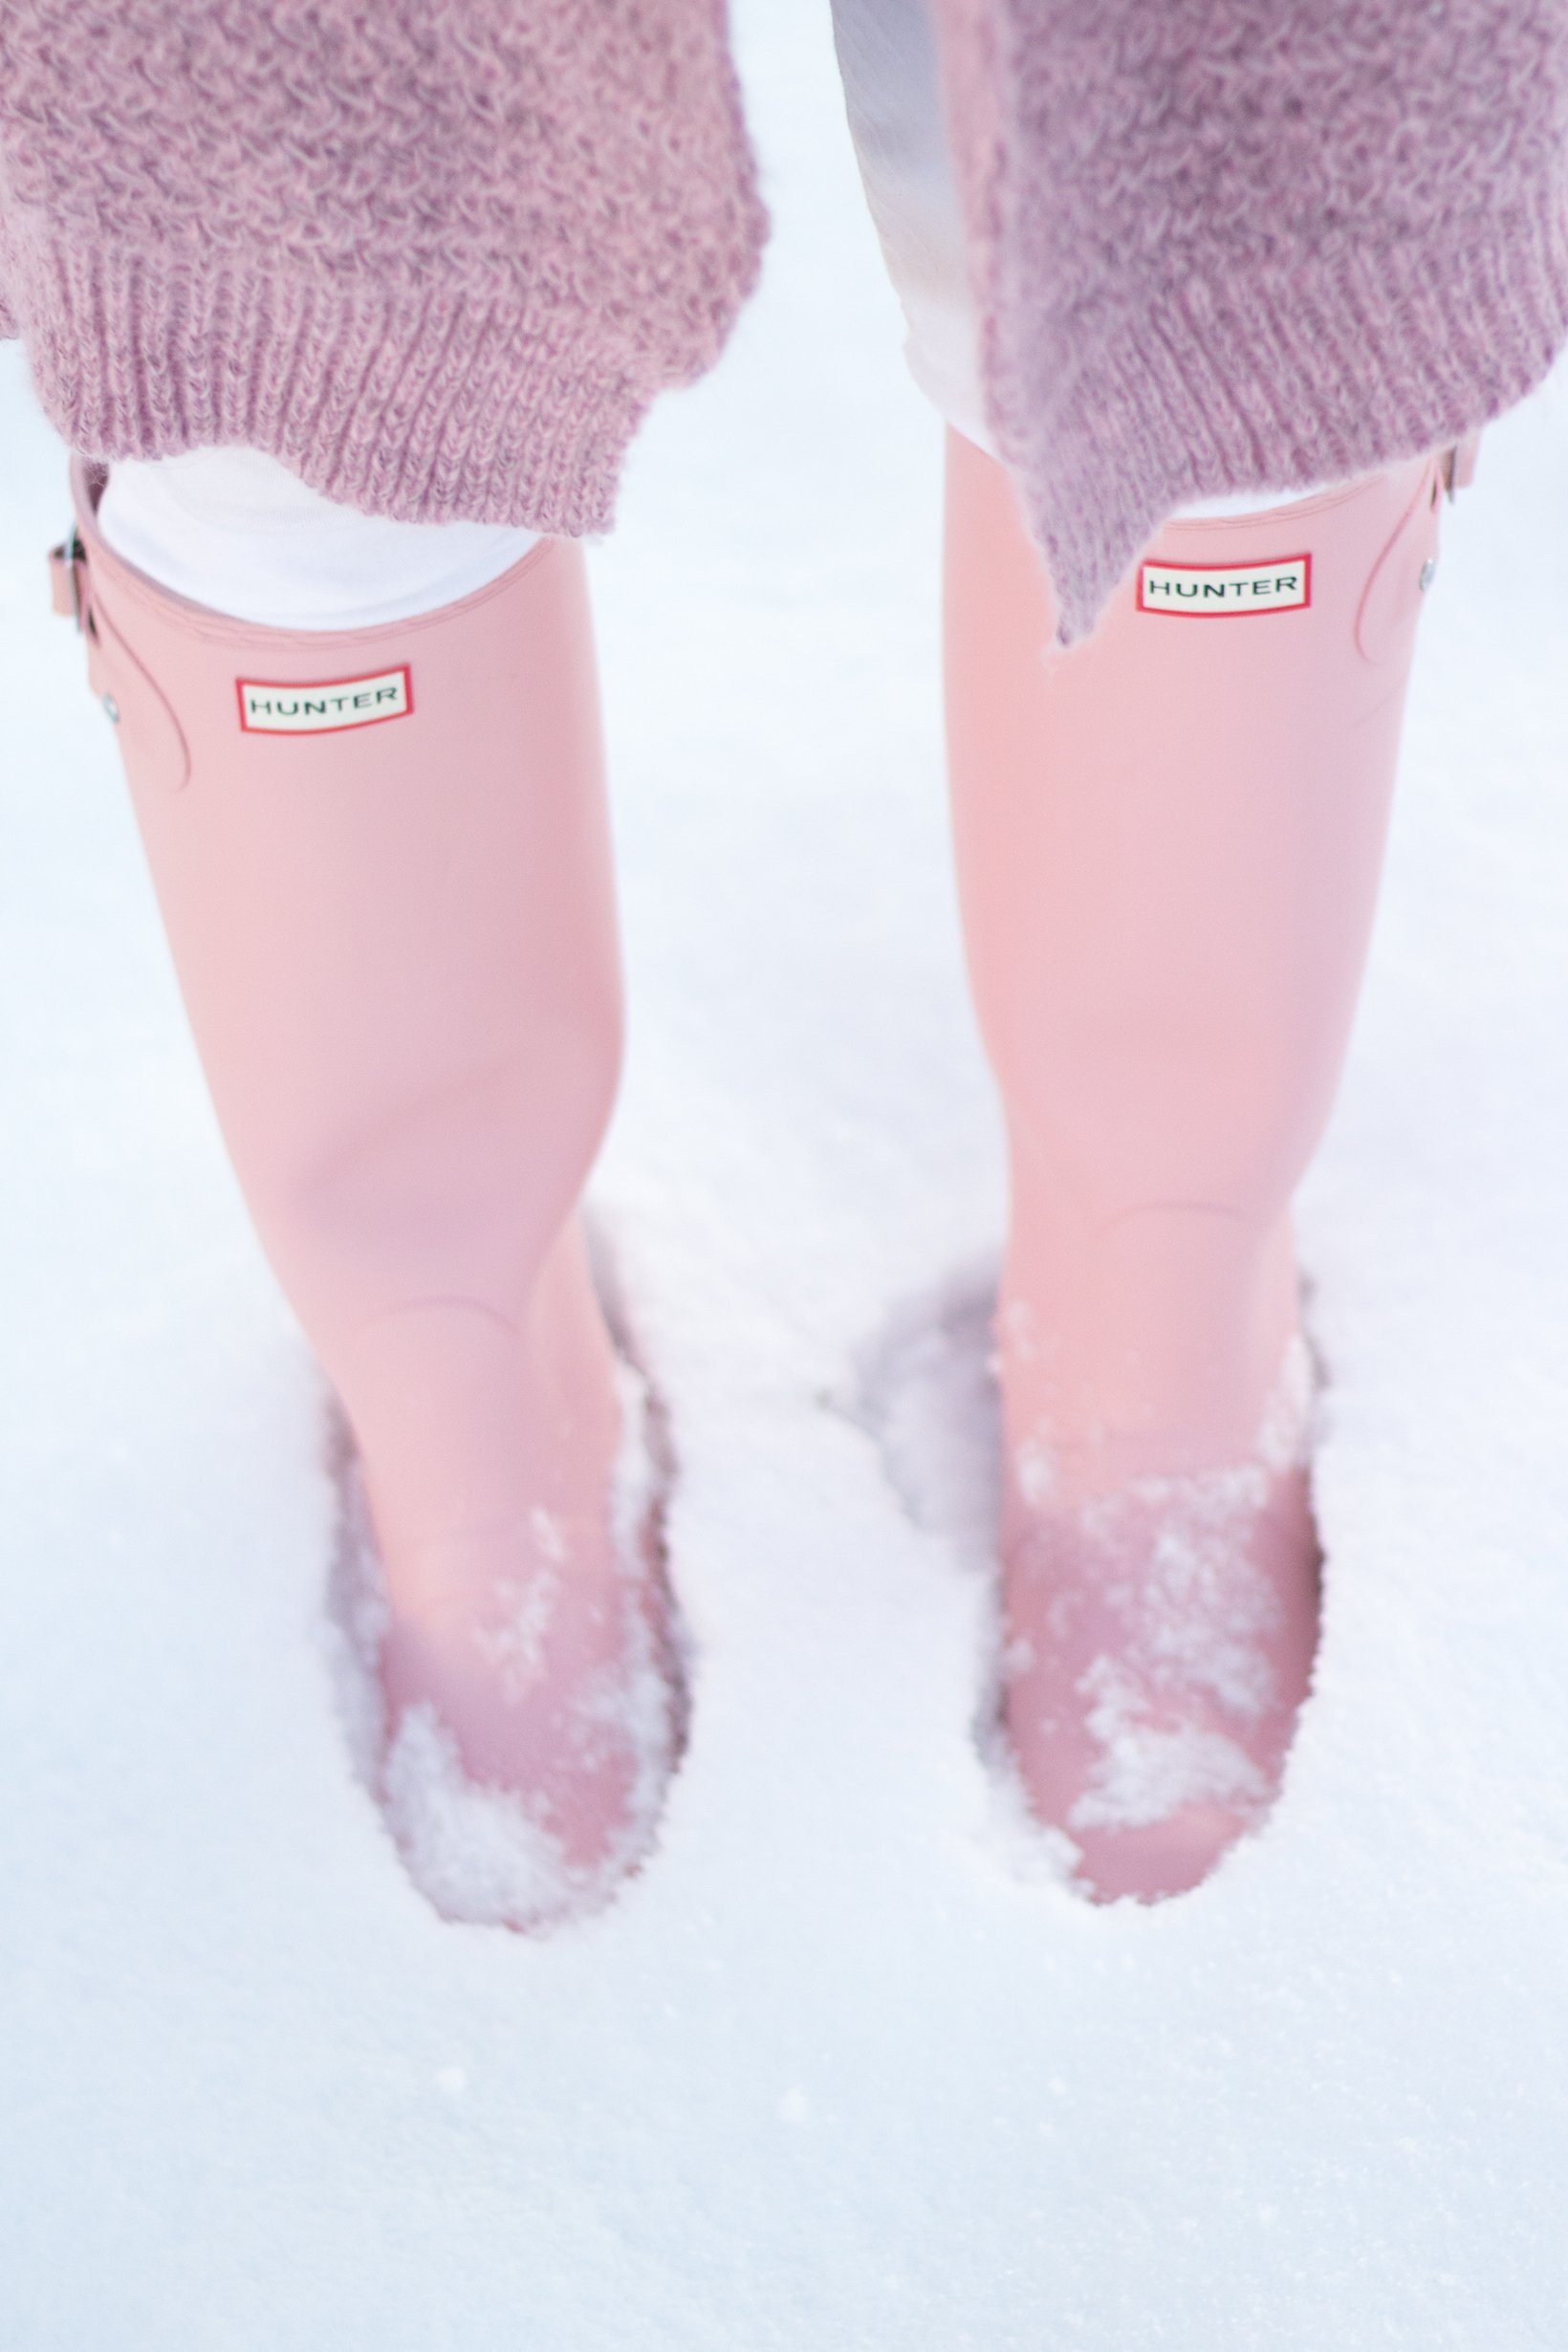 A fun pink knit sweater and pink hunter boots are the perfect equation for a snow bunny look. - Are Pink Hunter Boots Worth the Money? by Portland fashion blogger Top Knots and Pearls